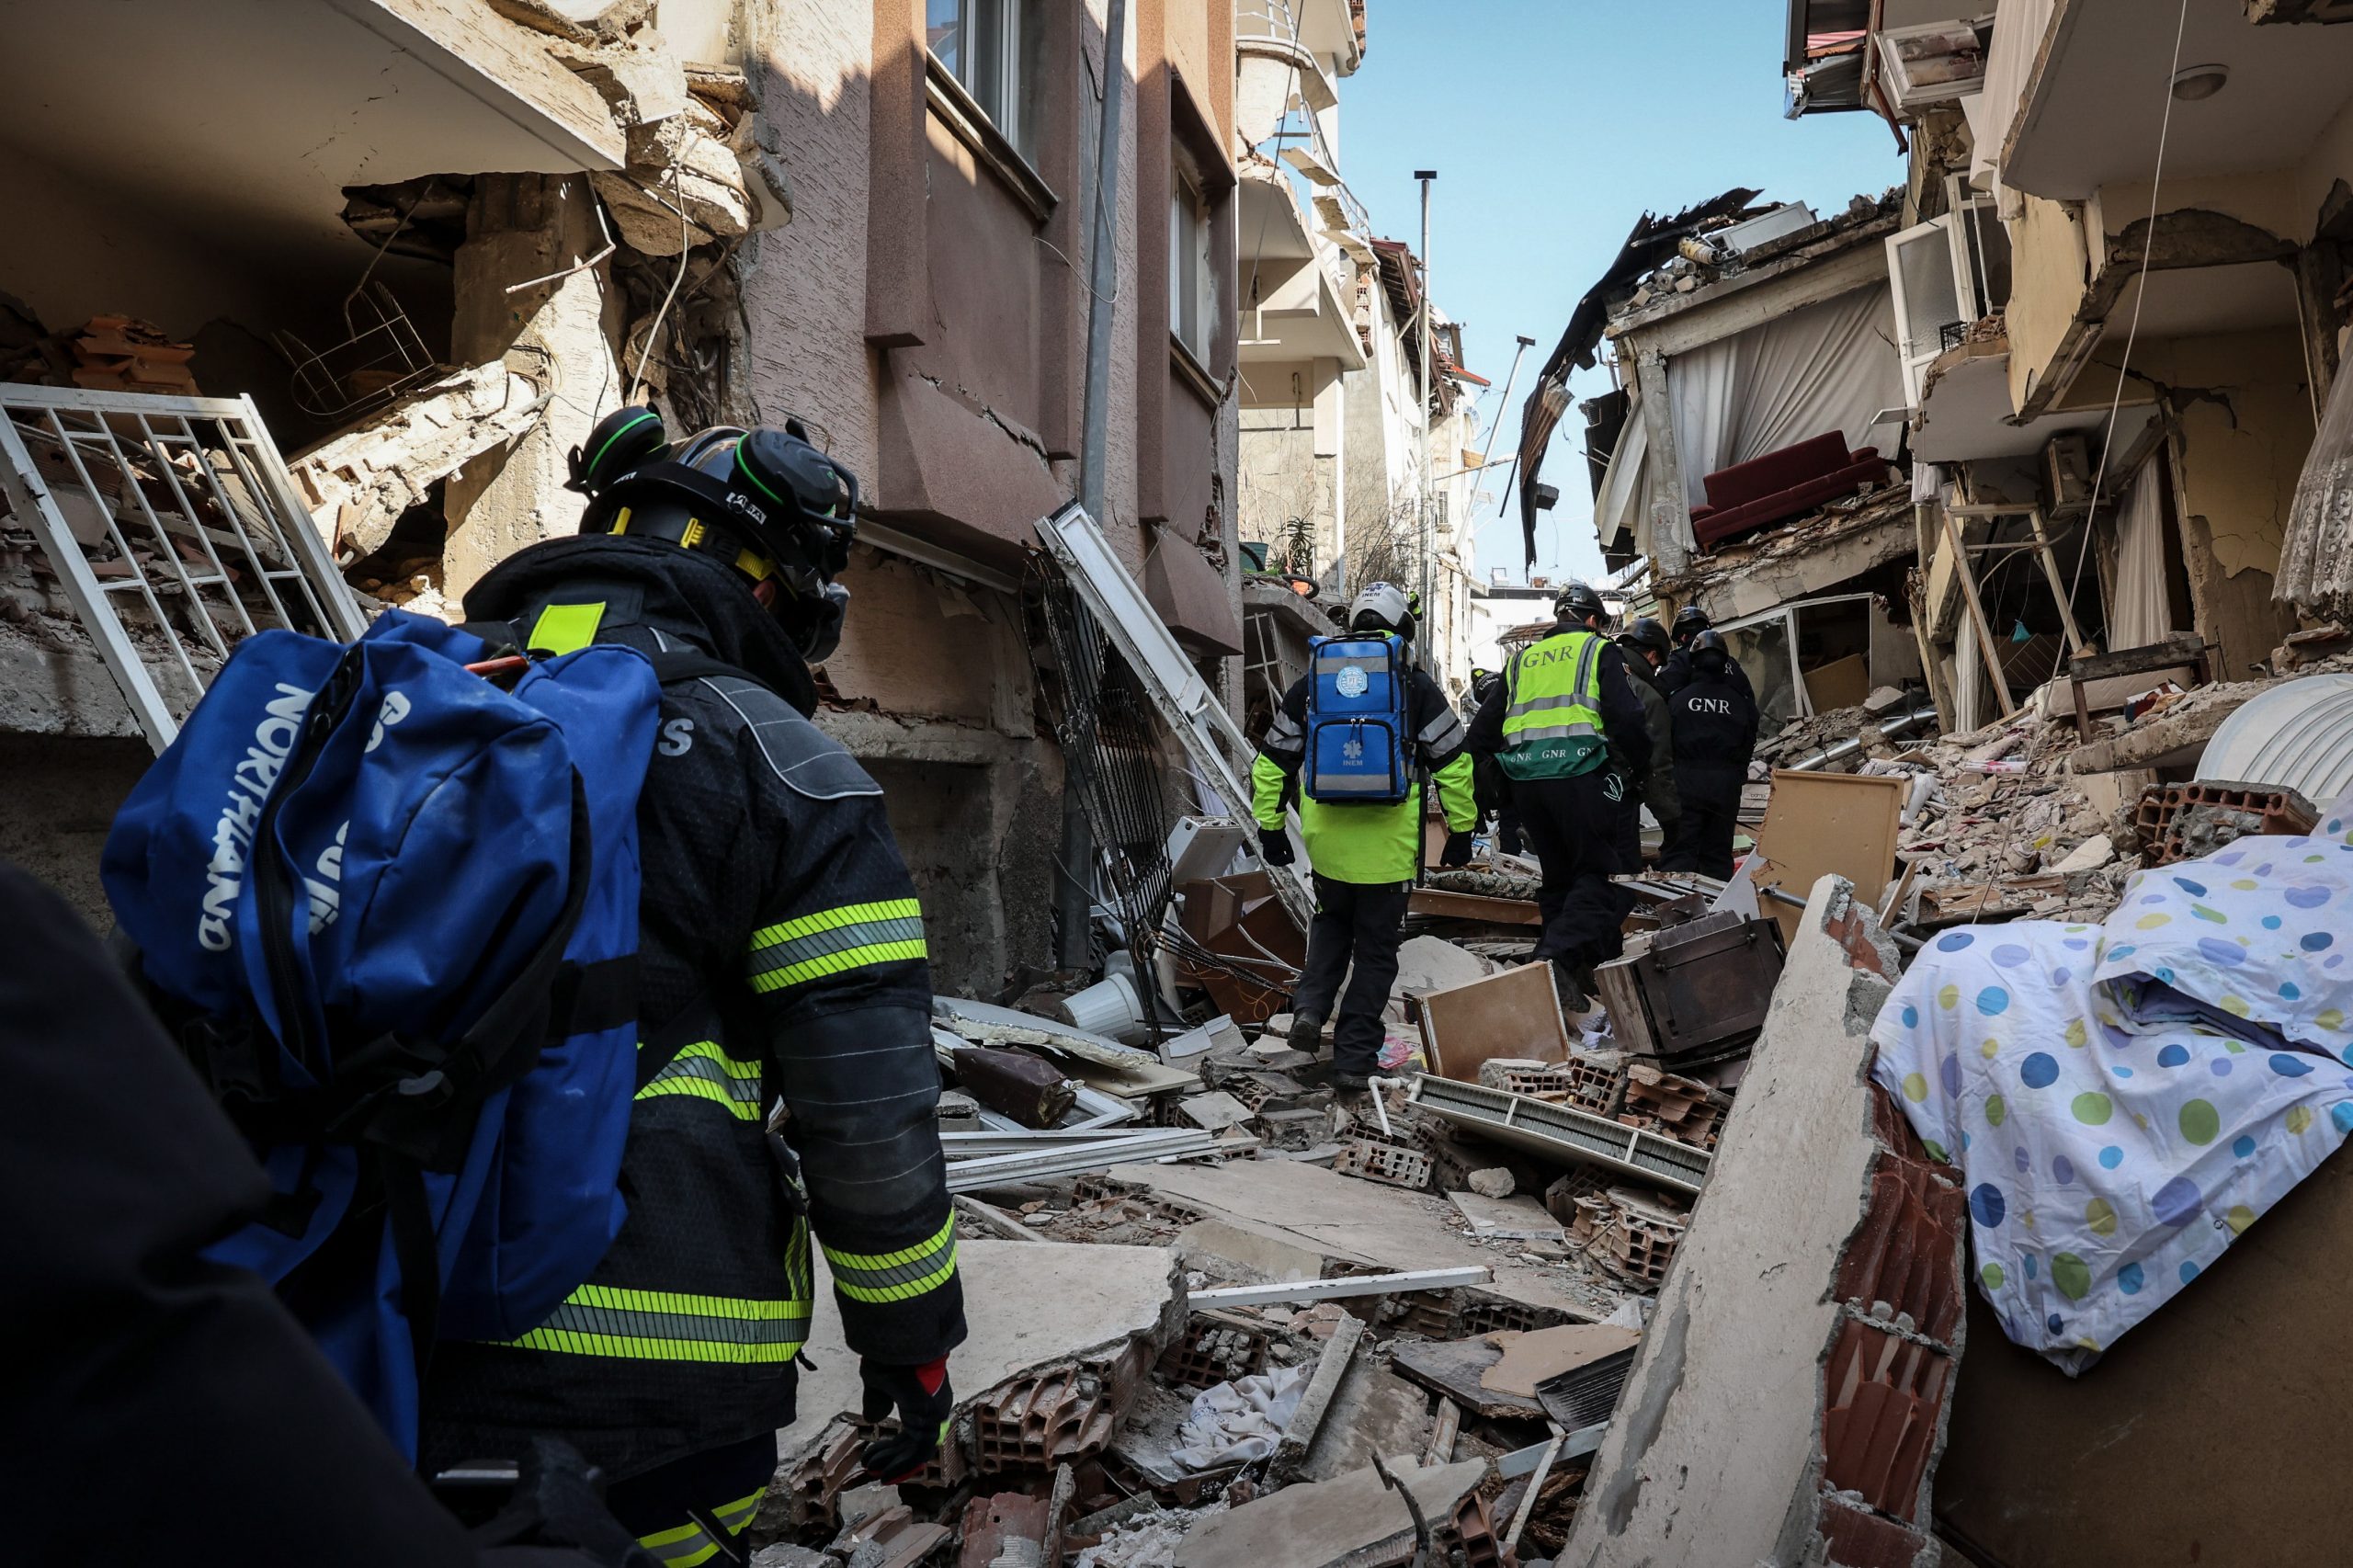 epa10460679 Portuguese rescue team members search areas of collapsed buildings in Antakya capital of Hatay Province, the southernmost province of Turkey after the powerful earthquake, 11 February 2023. A team from Portugal of 53 Civil Protection, GNR, and emergency medical personnel left 08 February, for Turkey to support search and rescue efforts after 06 February earthquake, which has already killed more than 24,000 people in Turkey and Syria.  EPA/JOAO RELVAS